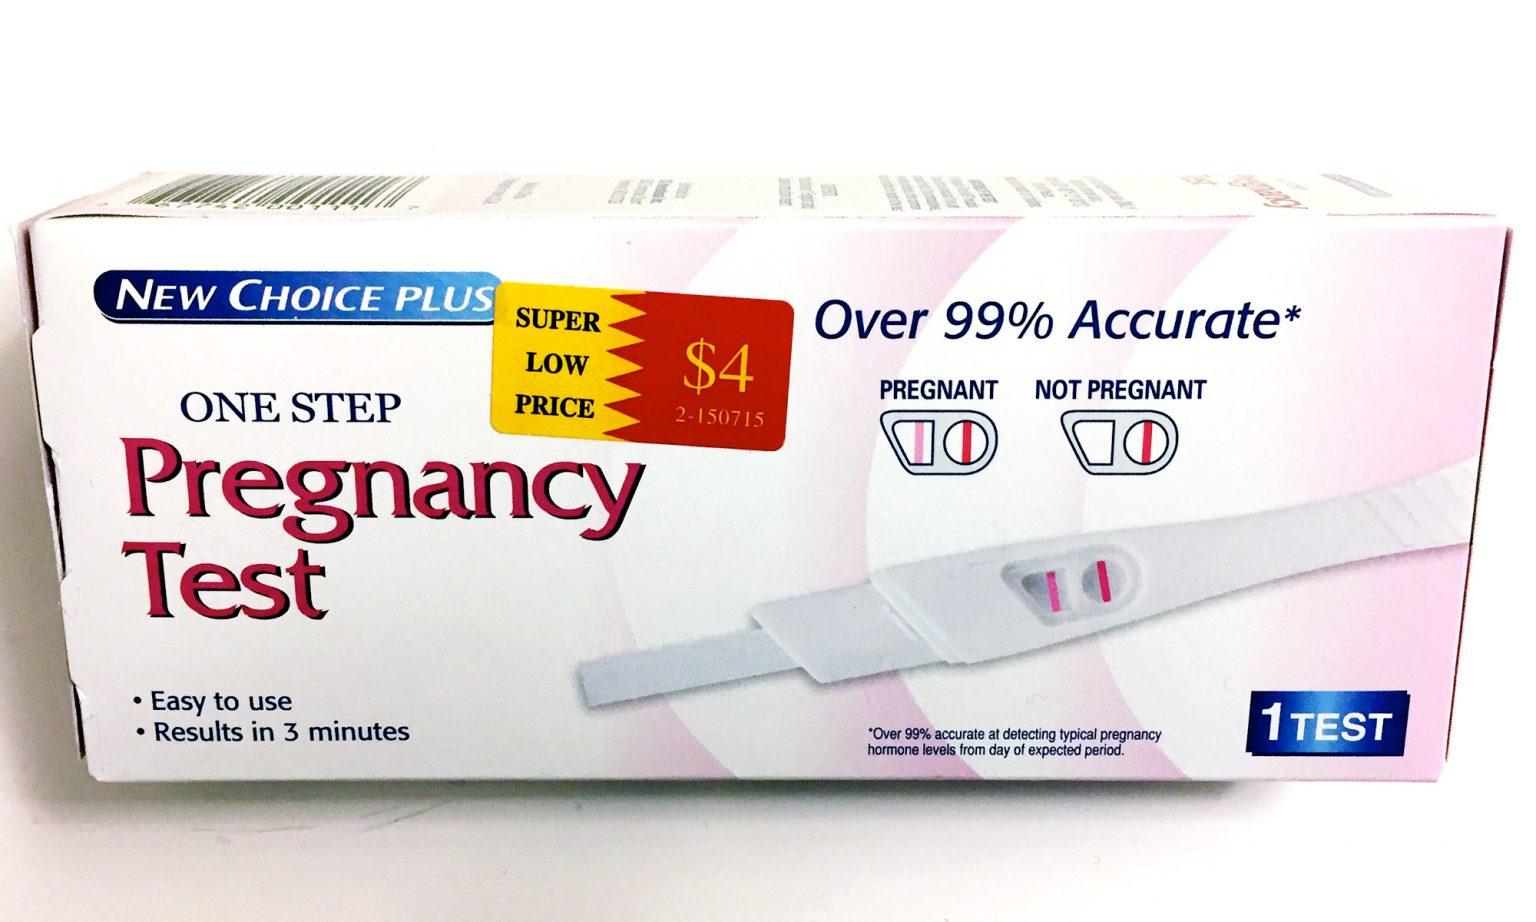 Where can I buy the New Choice Plus One Step Pregnancy ...